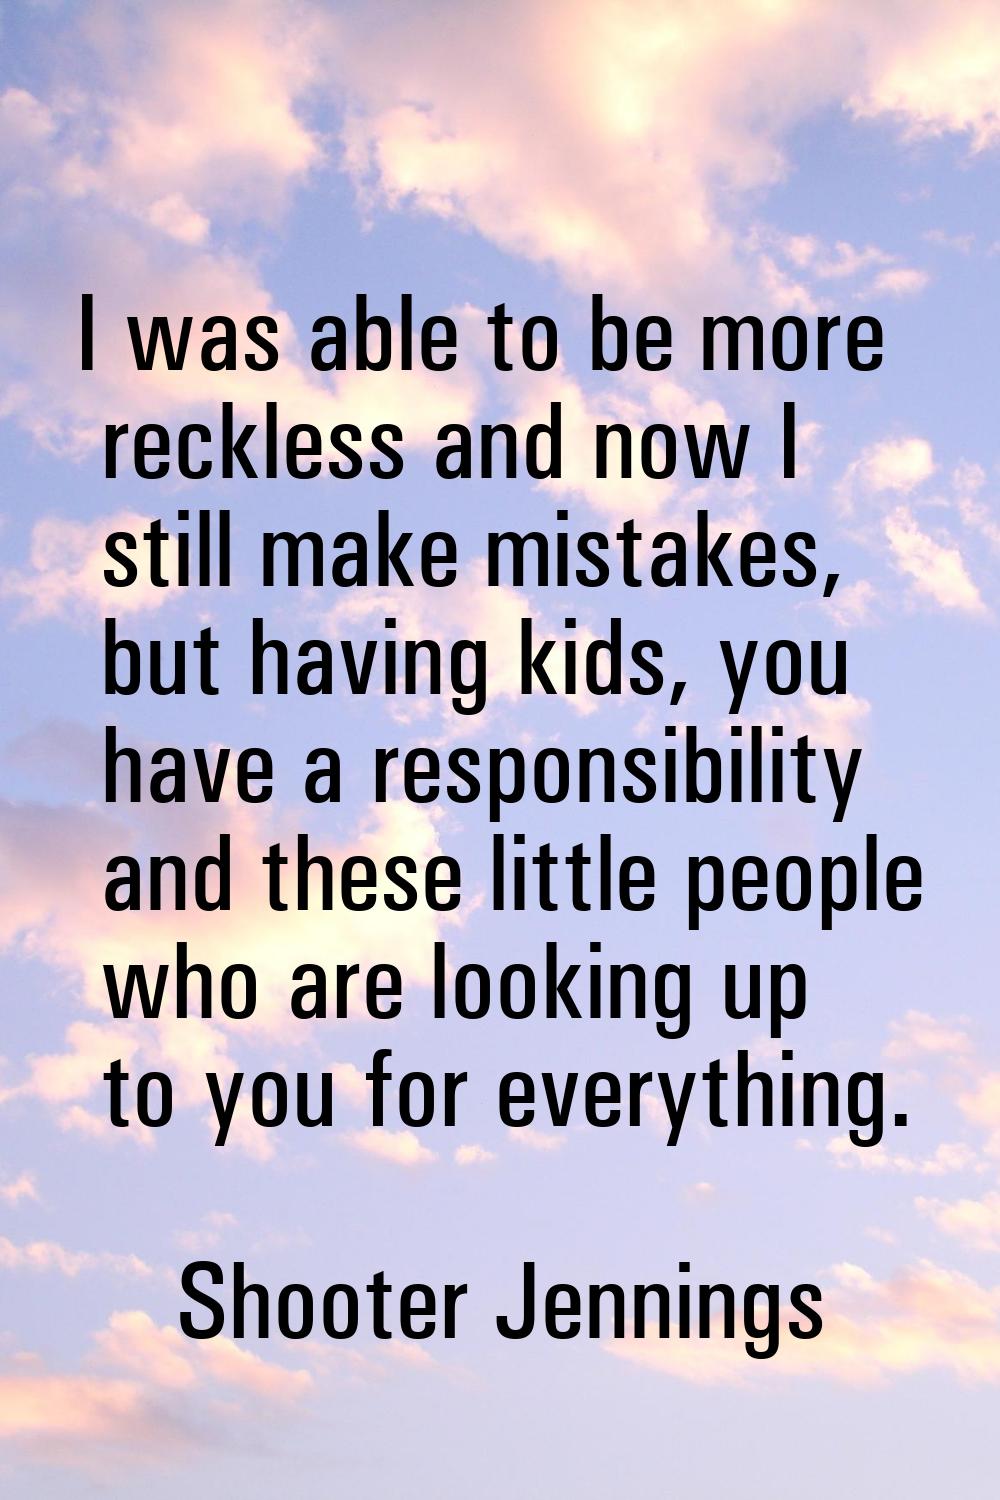 I was able to be more reckless and now I still make mistakes, but having kids, you have a responsib